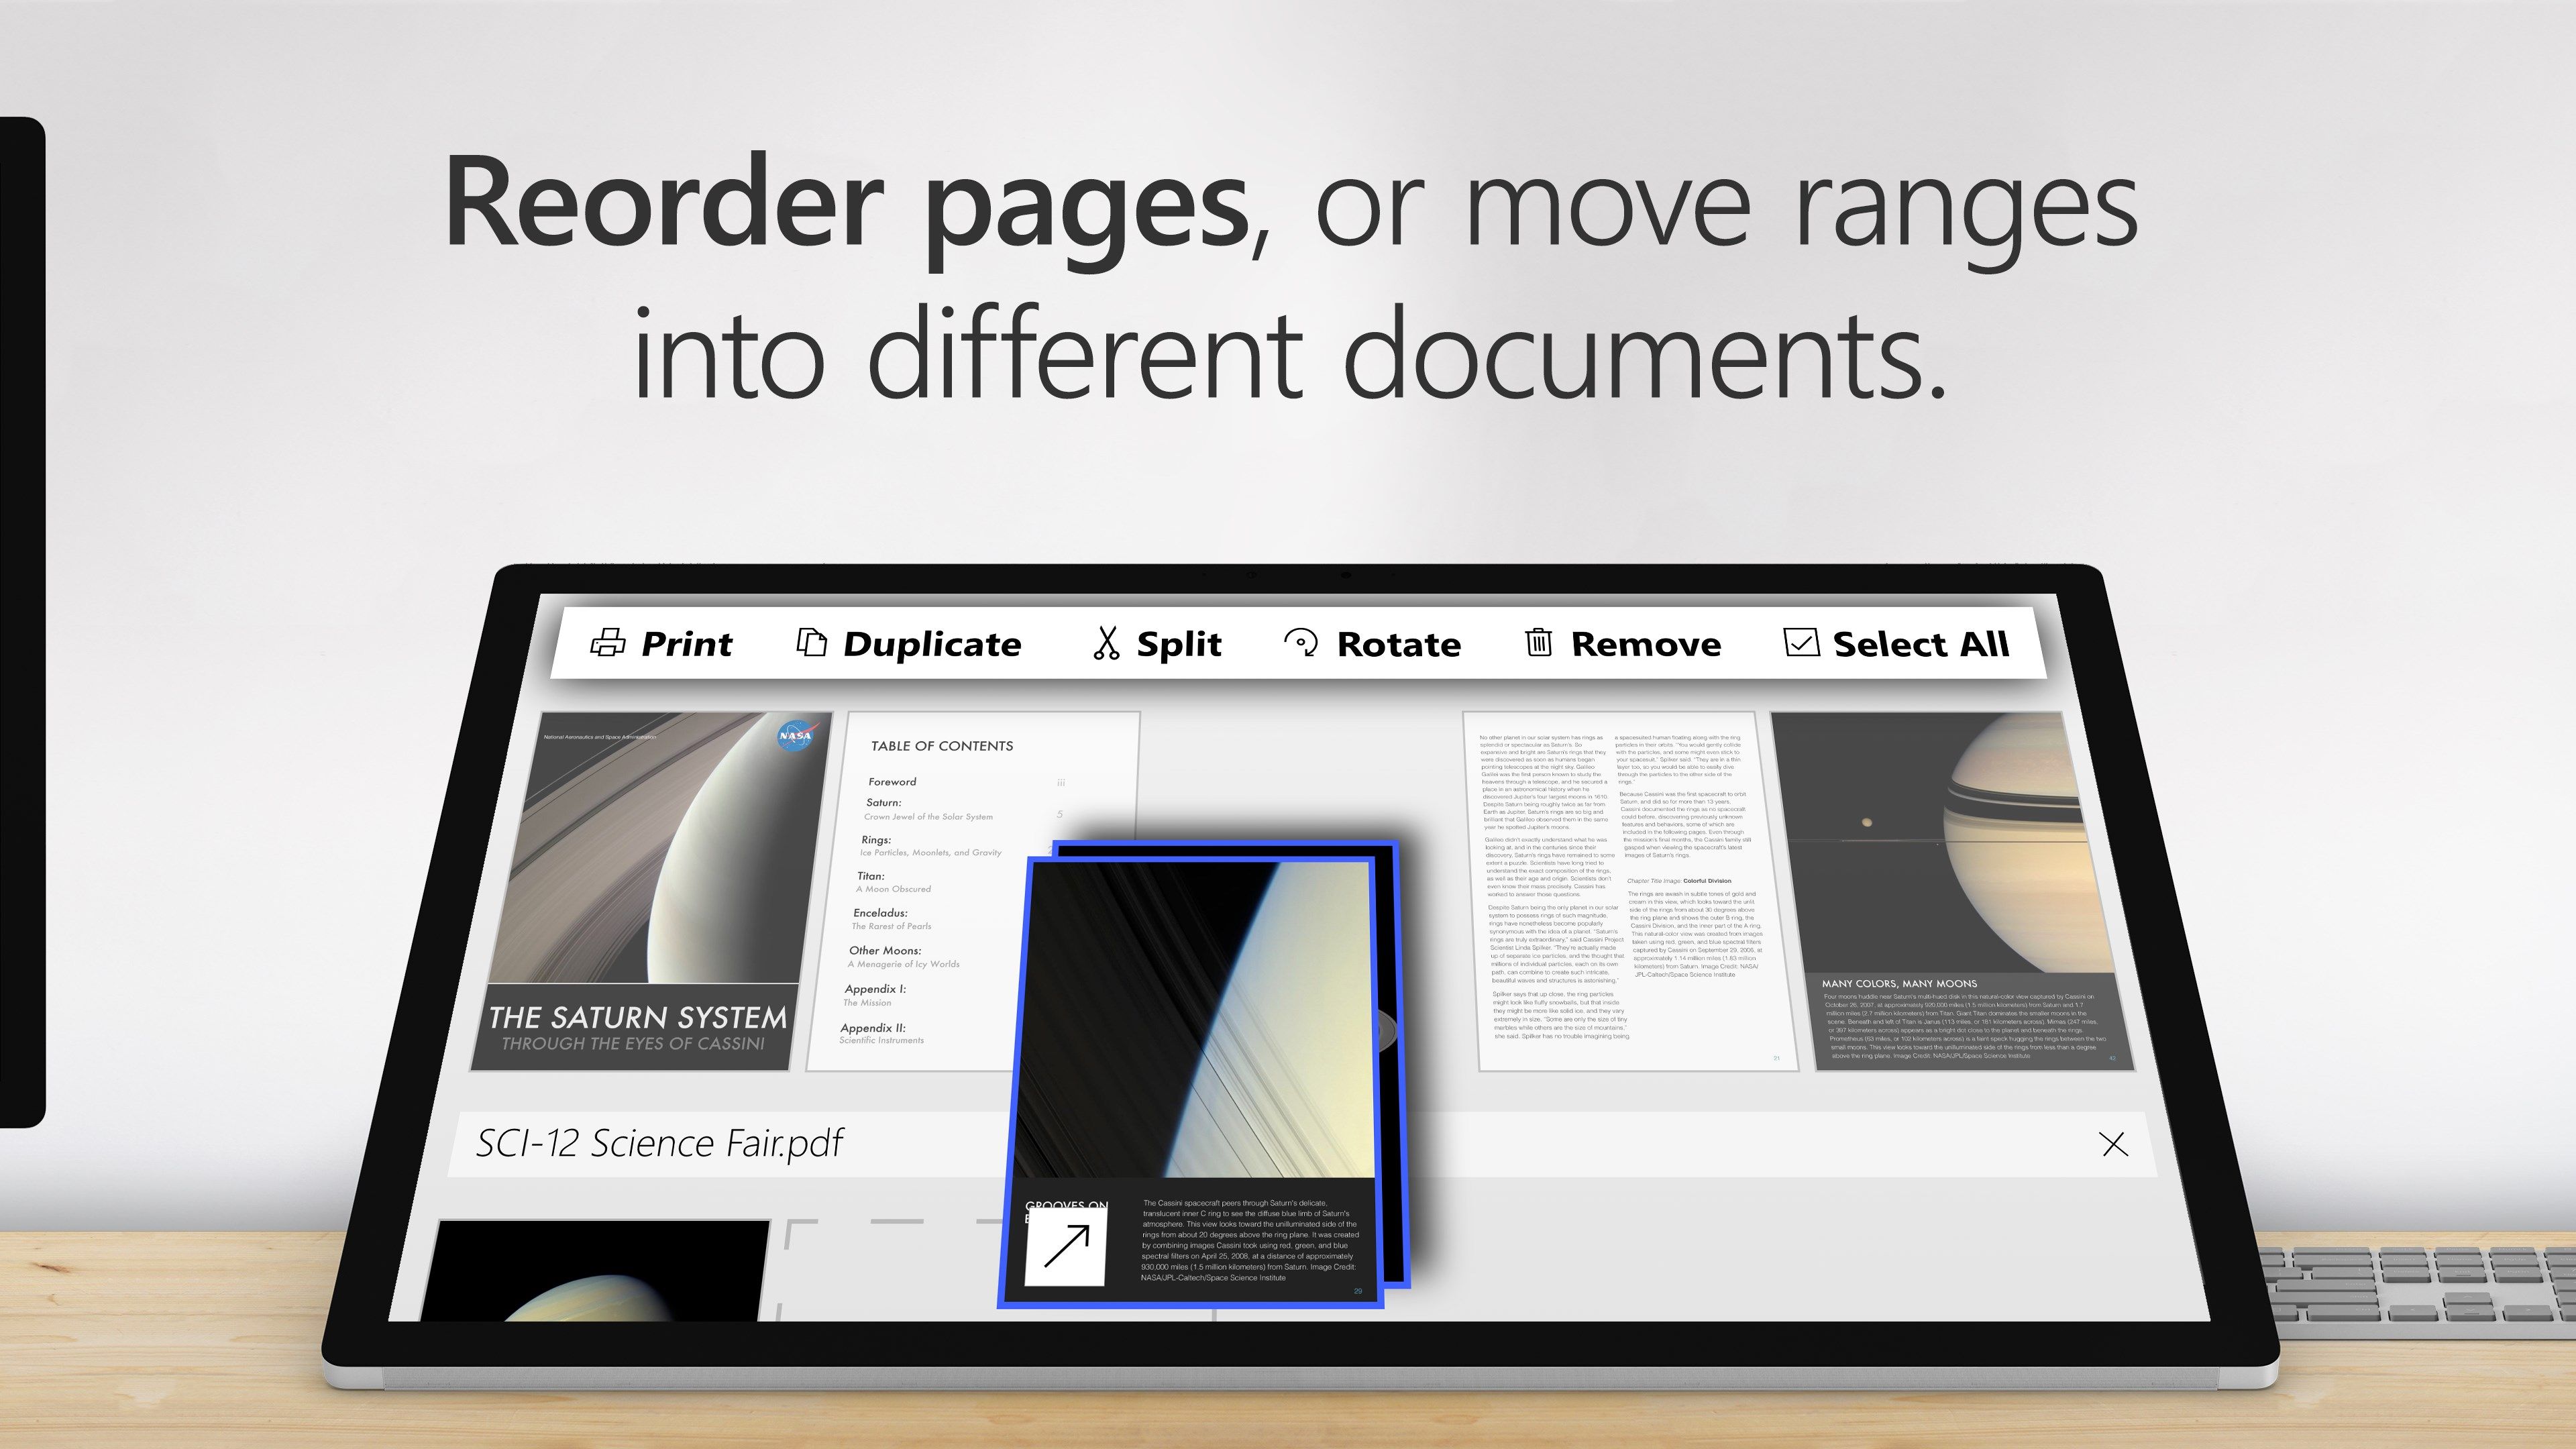 Reorder or move PDF pages.